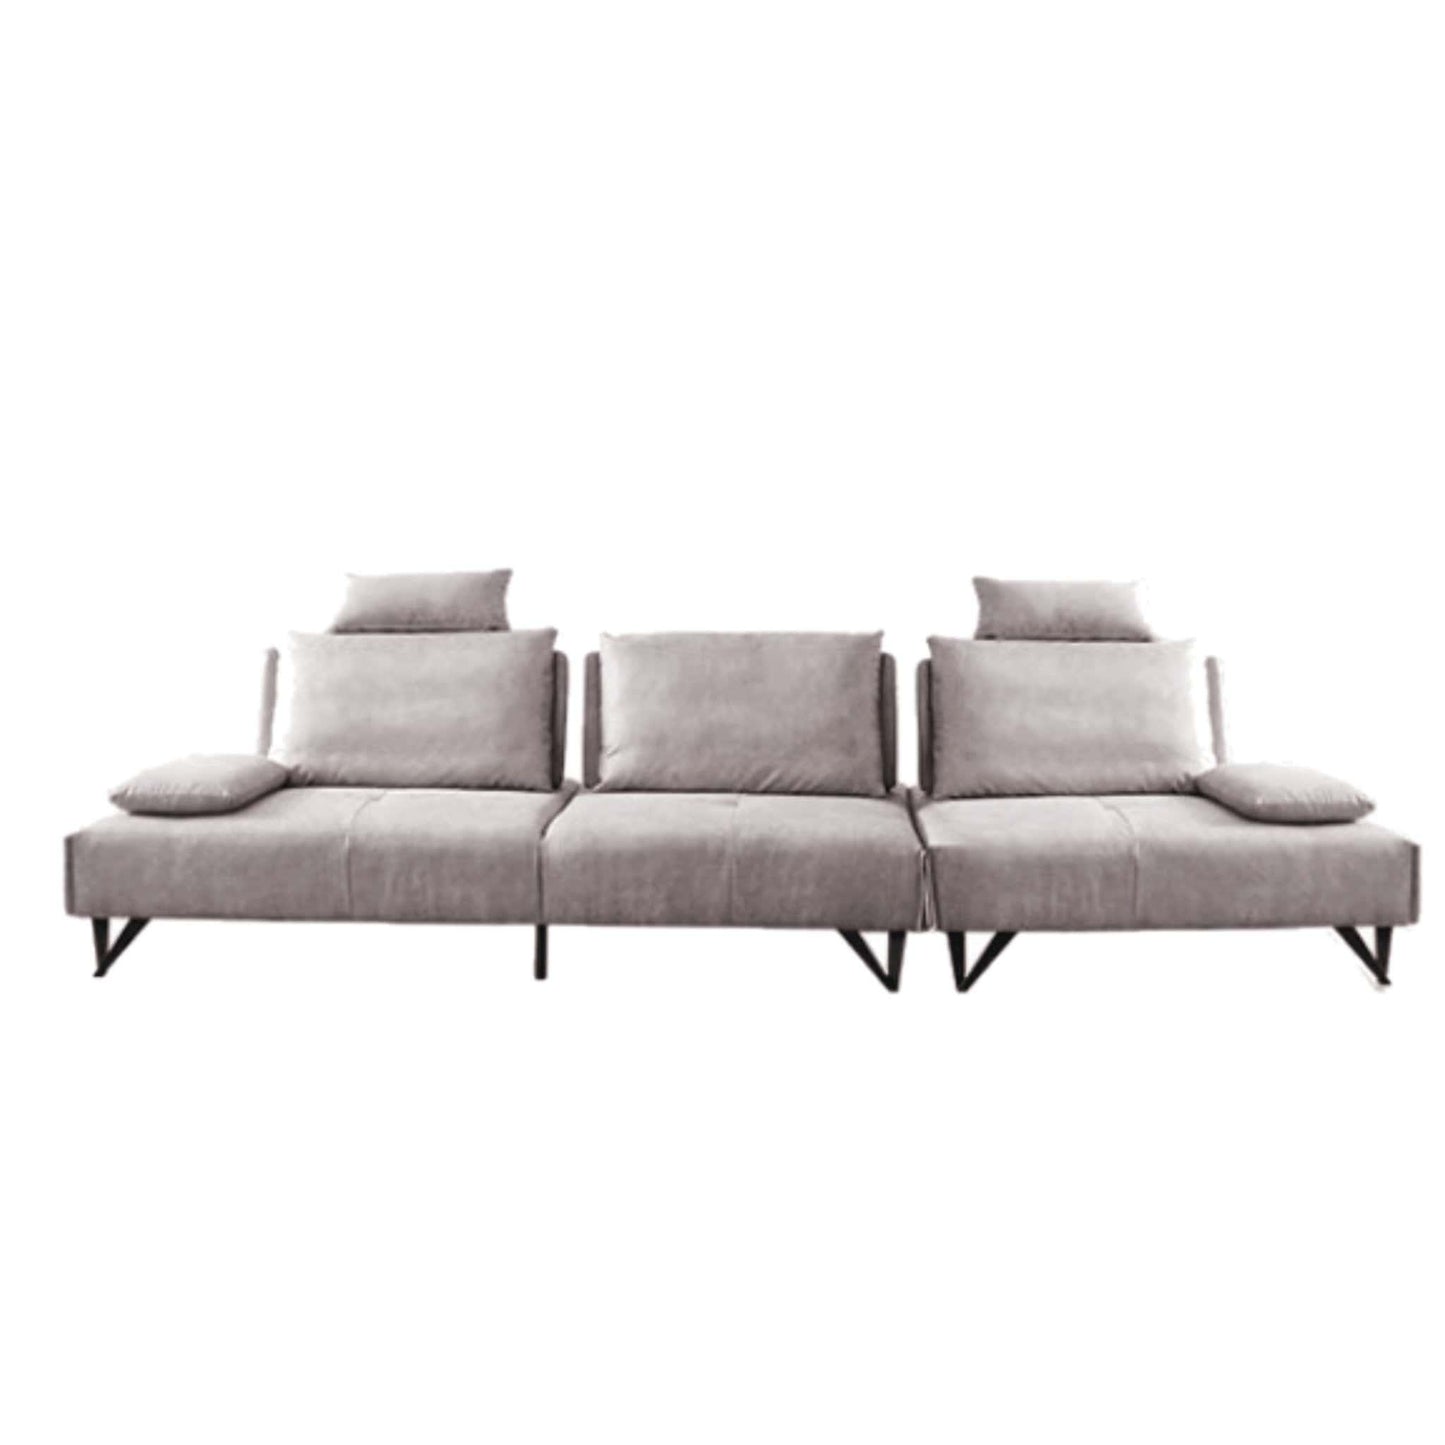 home-atelier-f31a Leather-Aire / 4 seater/ Length 285cm / Dark Grey Tallini Slider Sofa